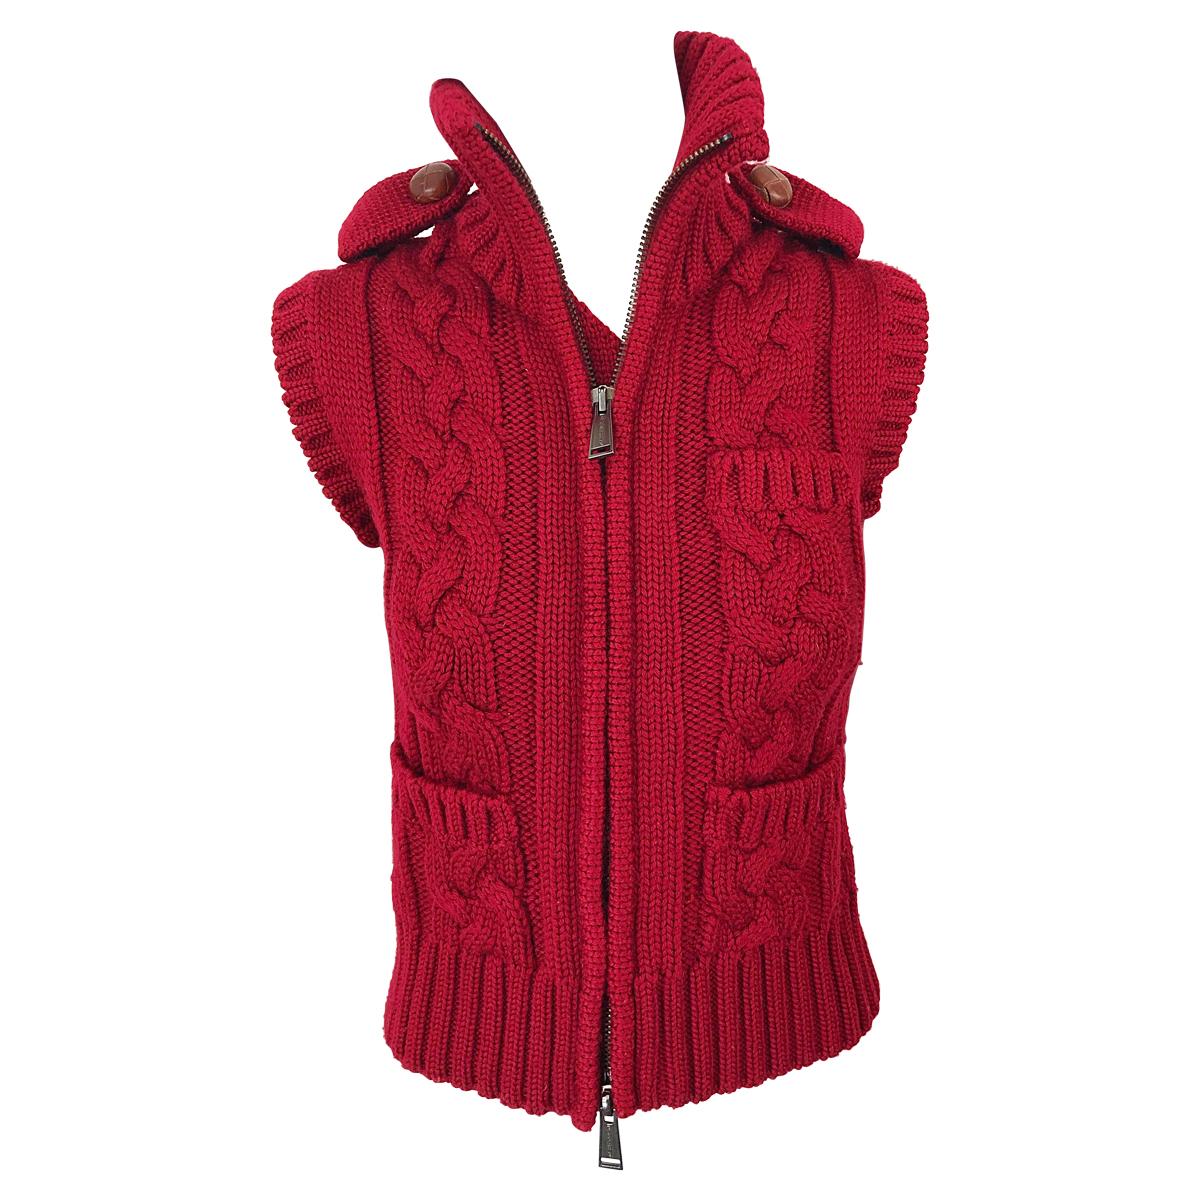 DSquared2 Early 2000s Lipstick Red Wool Sleeveless Cardigan Sweater Vest Top For Sale